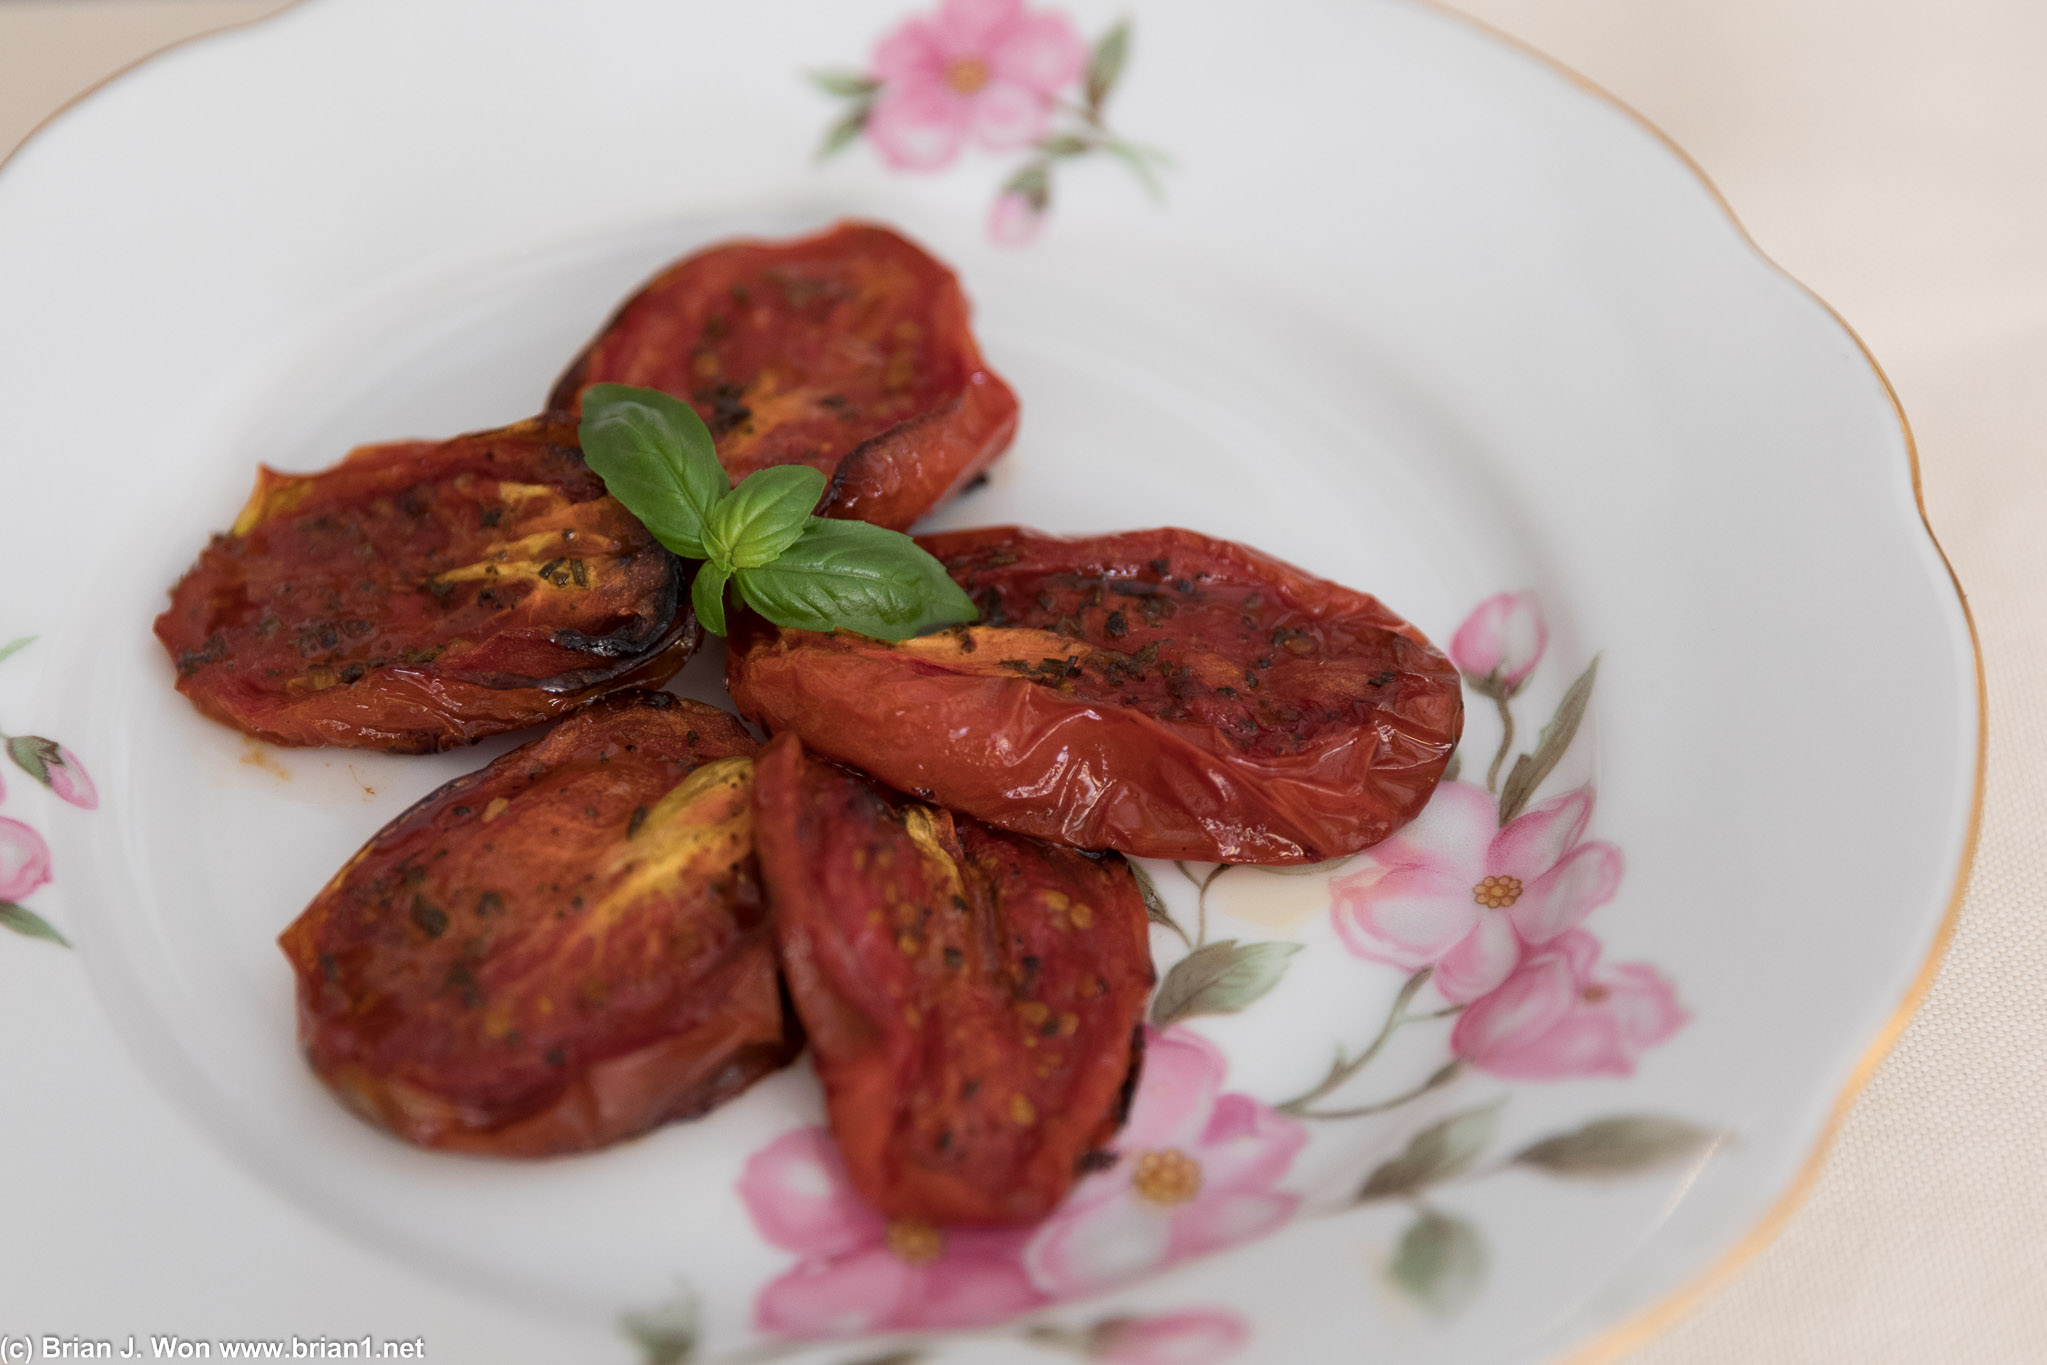 Baked tomatoes were intense, almost like sun-dried. The best dish by far.